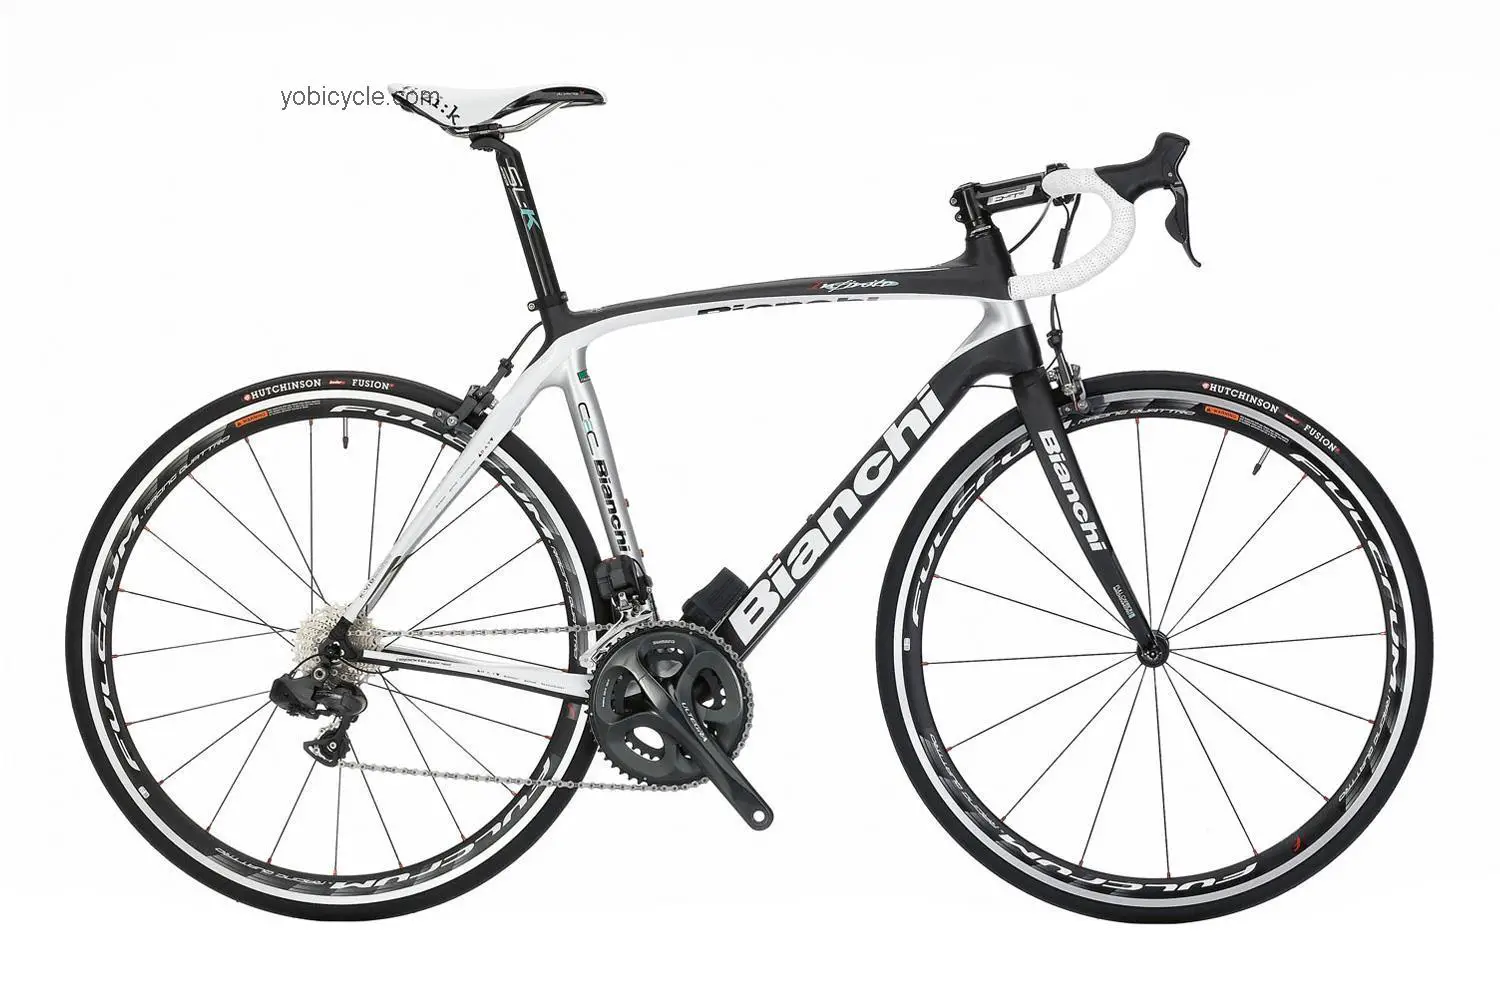 Bianchi Infinito Ultegra Di2 competitors and comparison tool online specs and performance